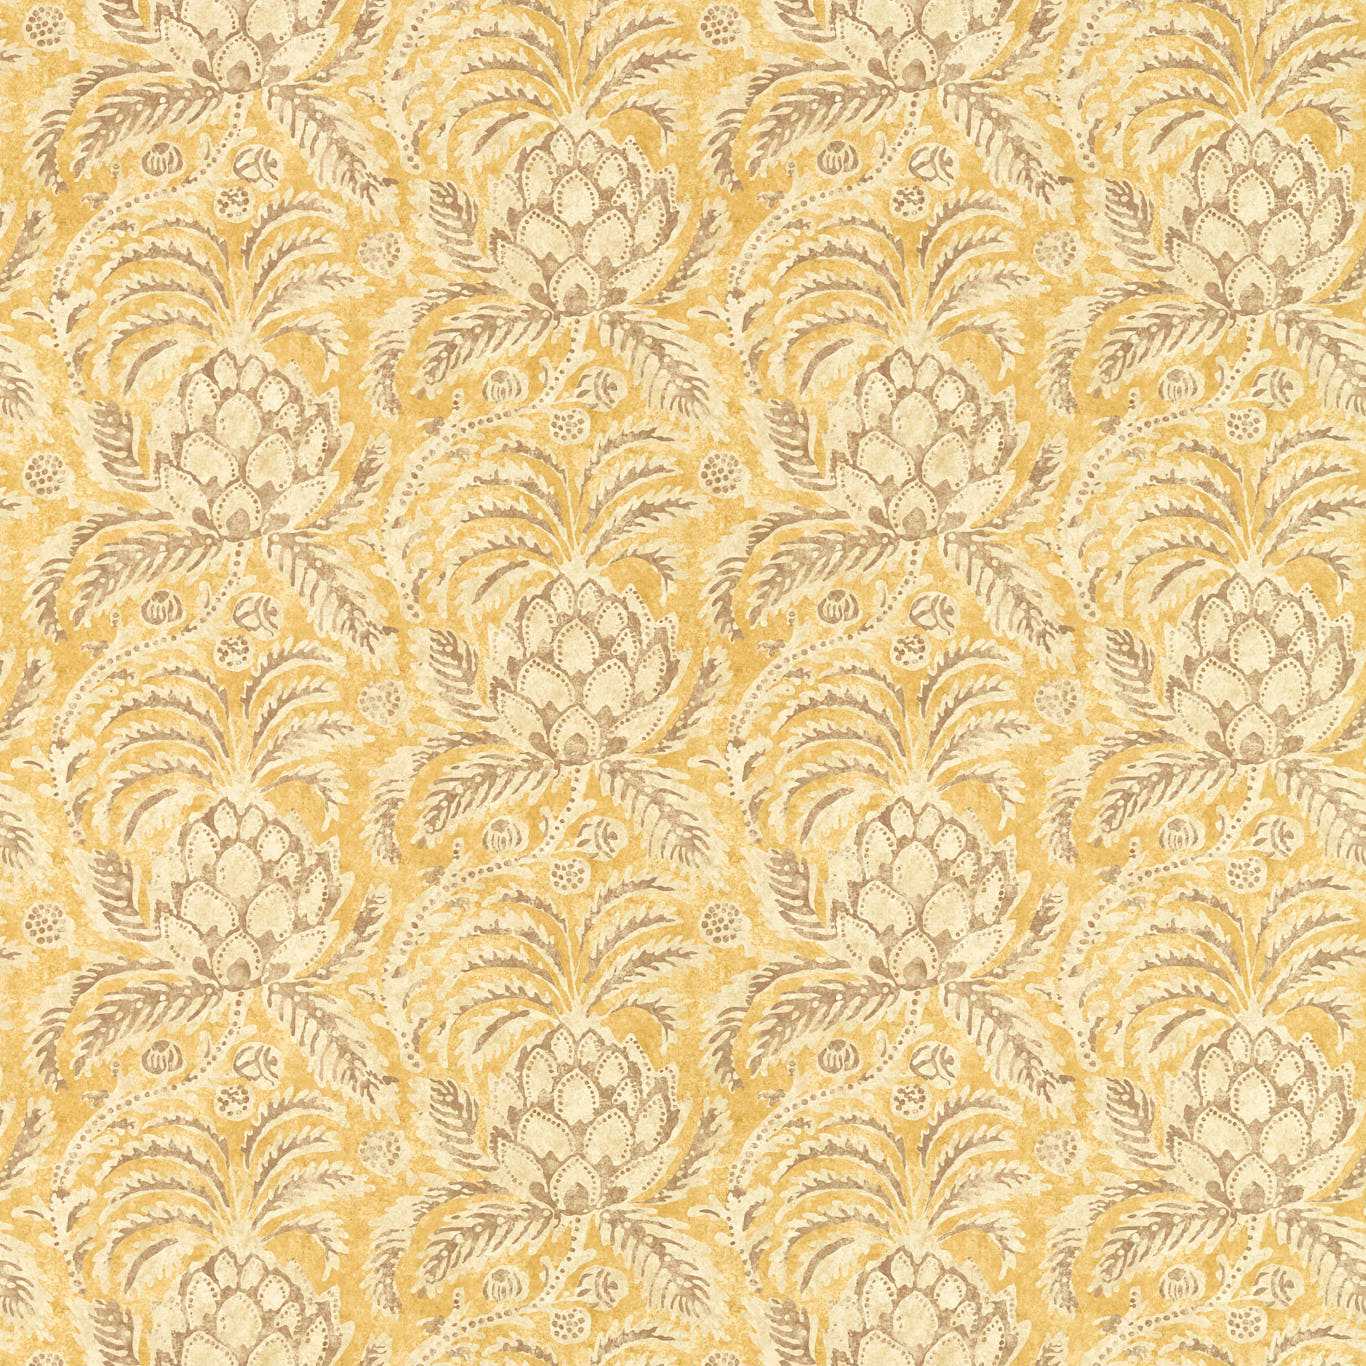 Pina de Indes Tiger's Eye Wallpaper by ZOF